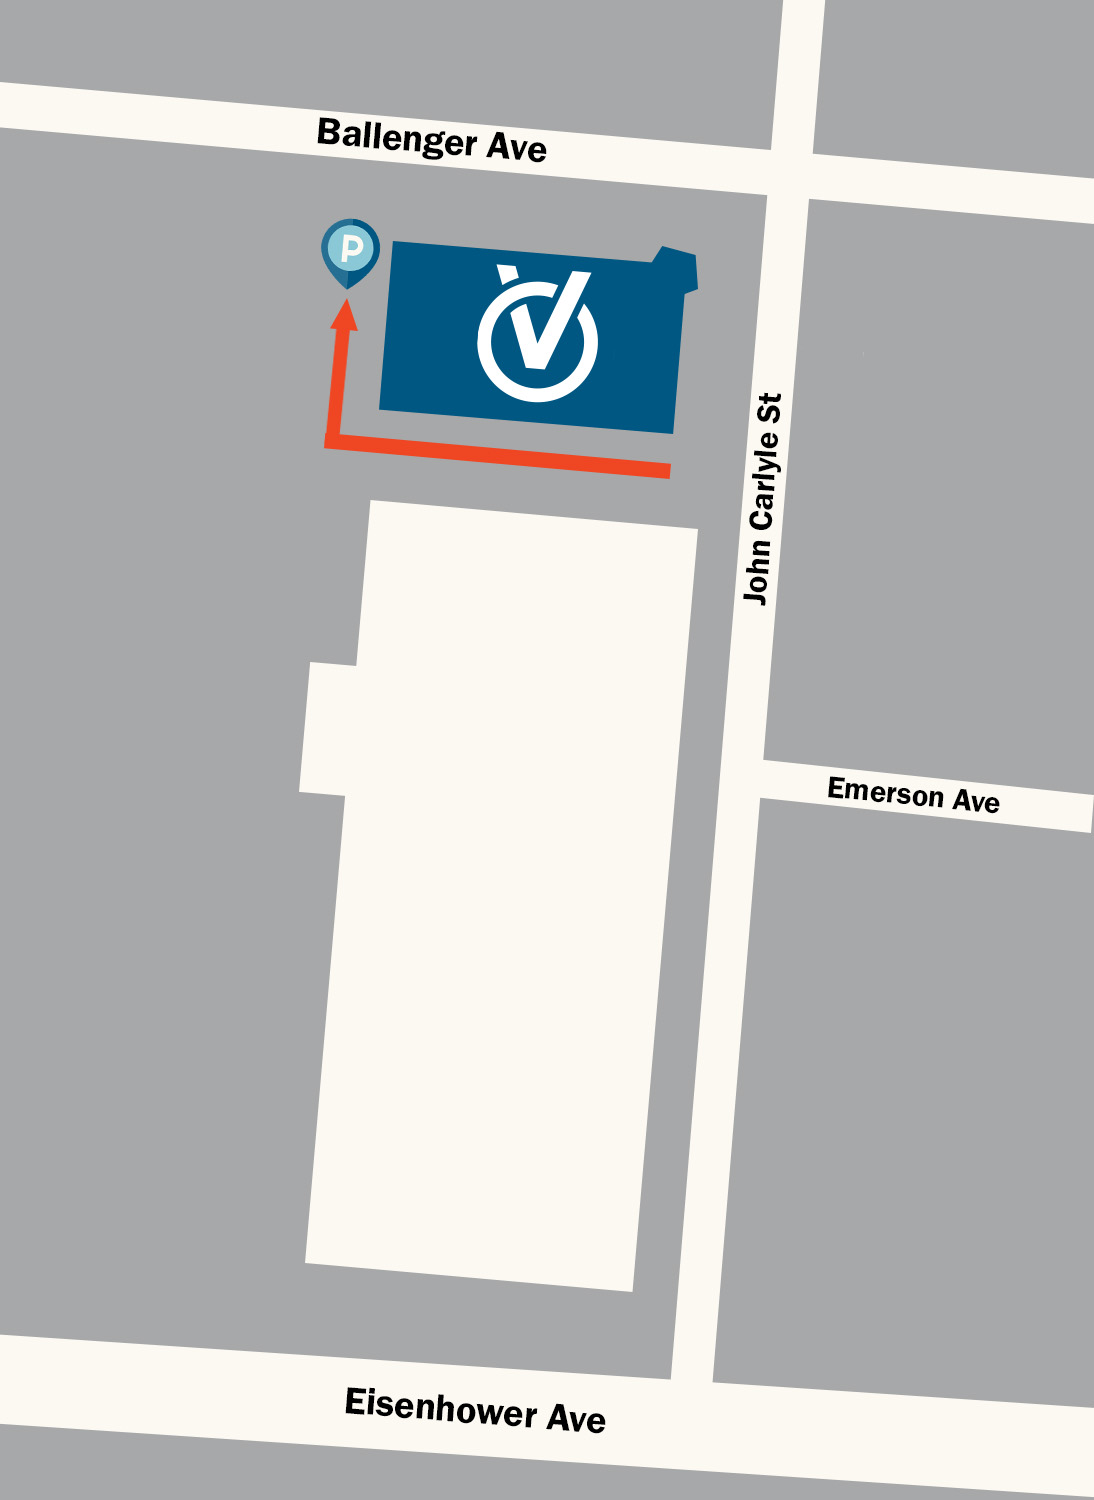 parking map illustrating where to park for the Alexandria office